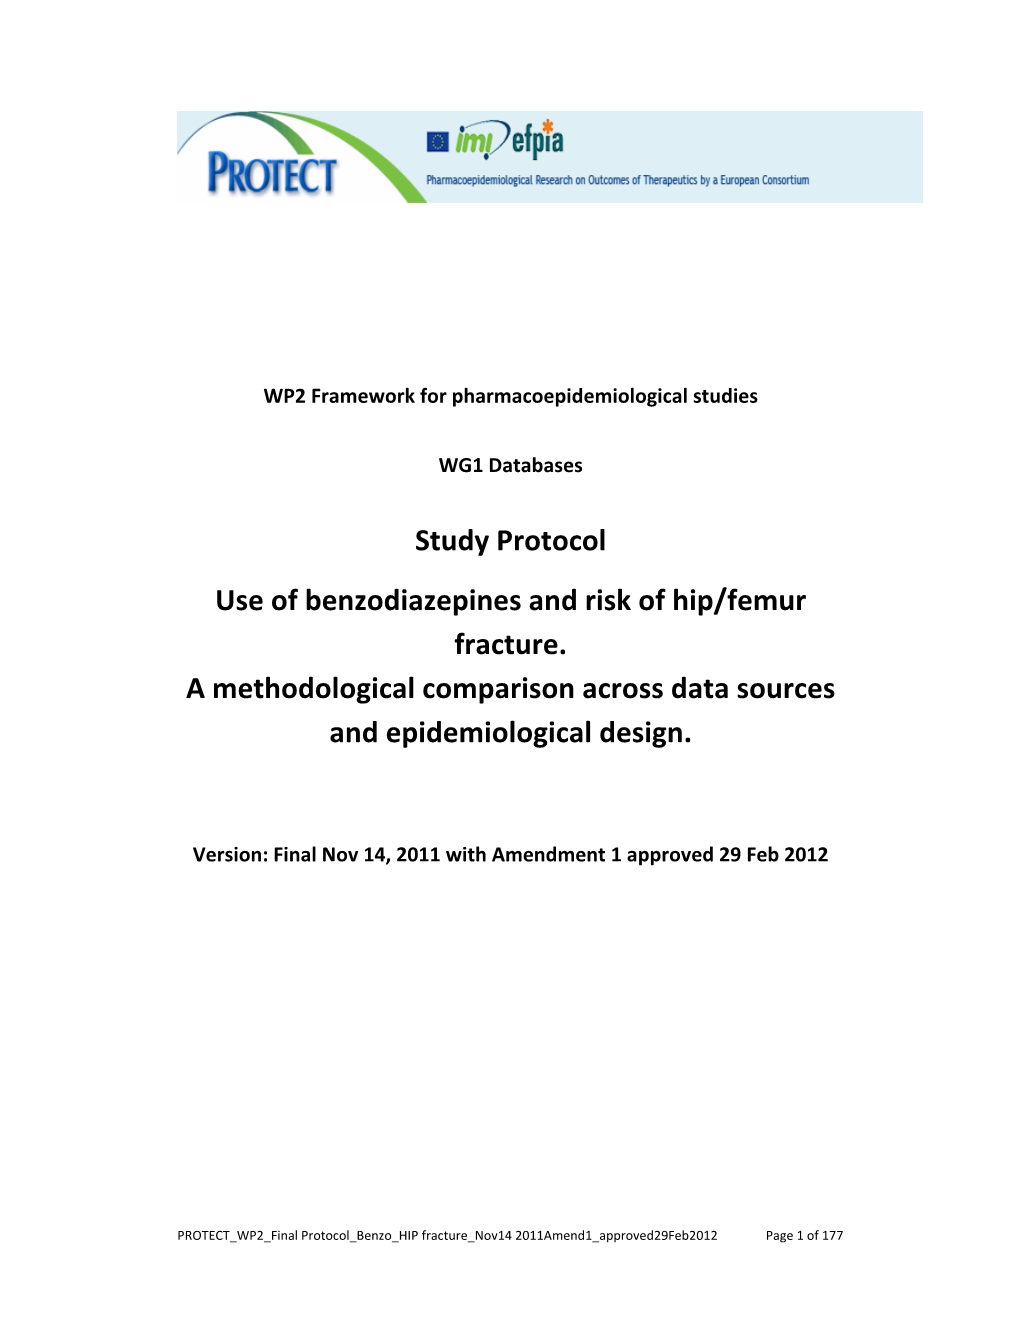 Study Protocol Use of Benzodiazepines and Risk of Hip/Femur Fracture